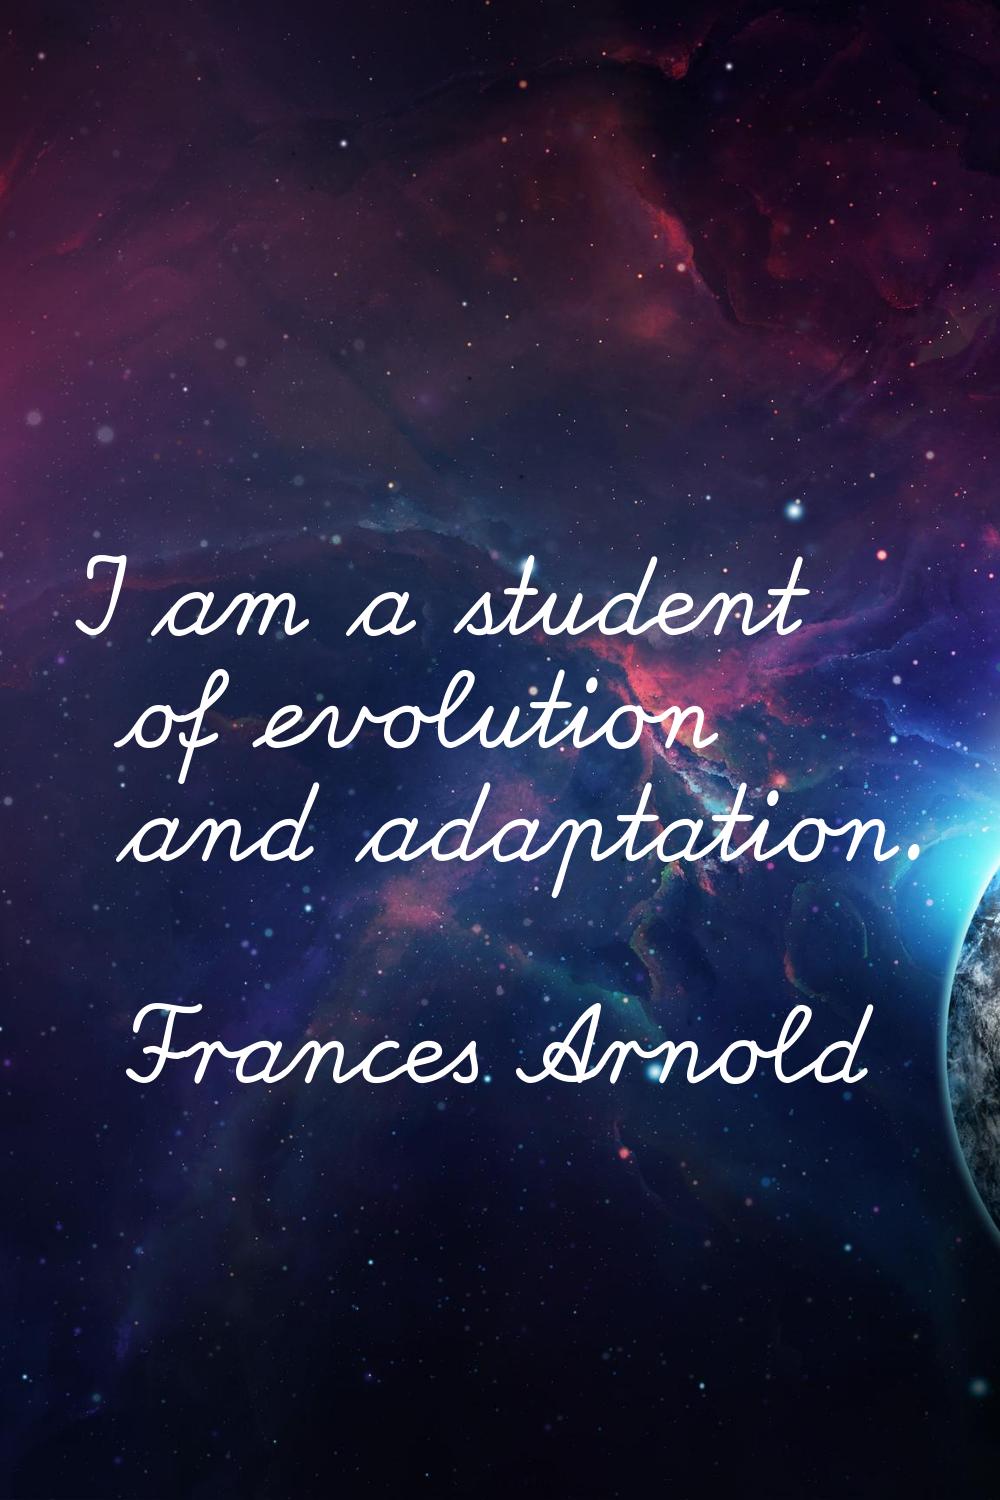 I am a student of evolution and adaptation.